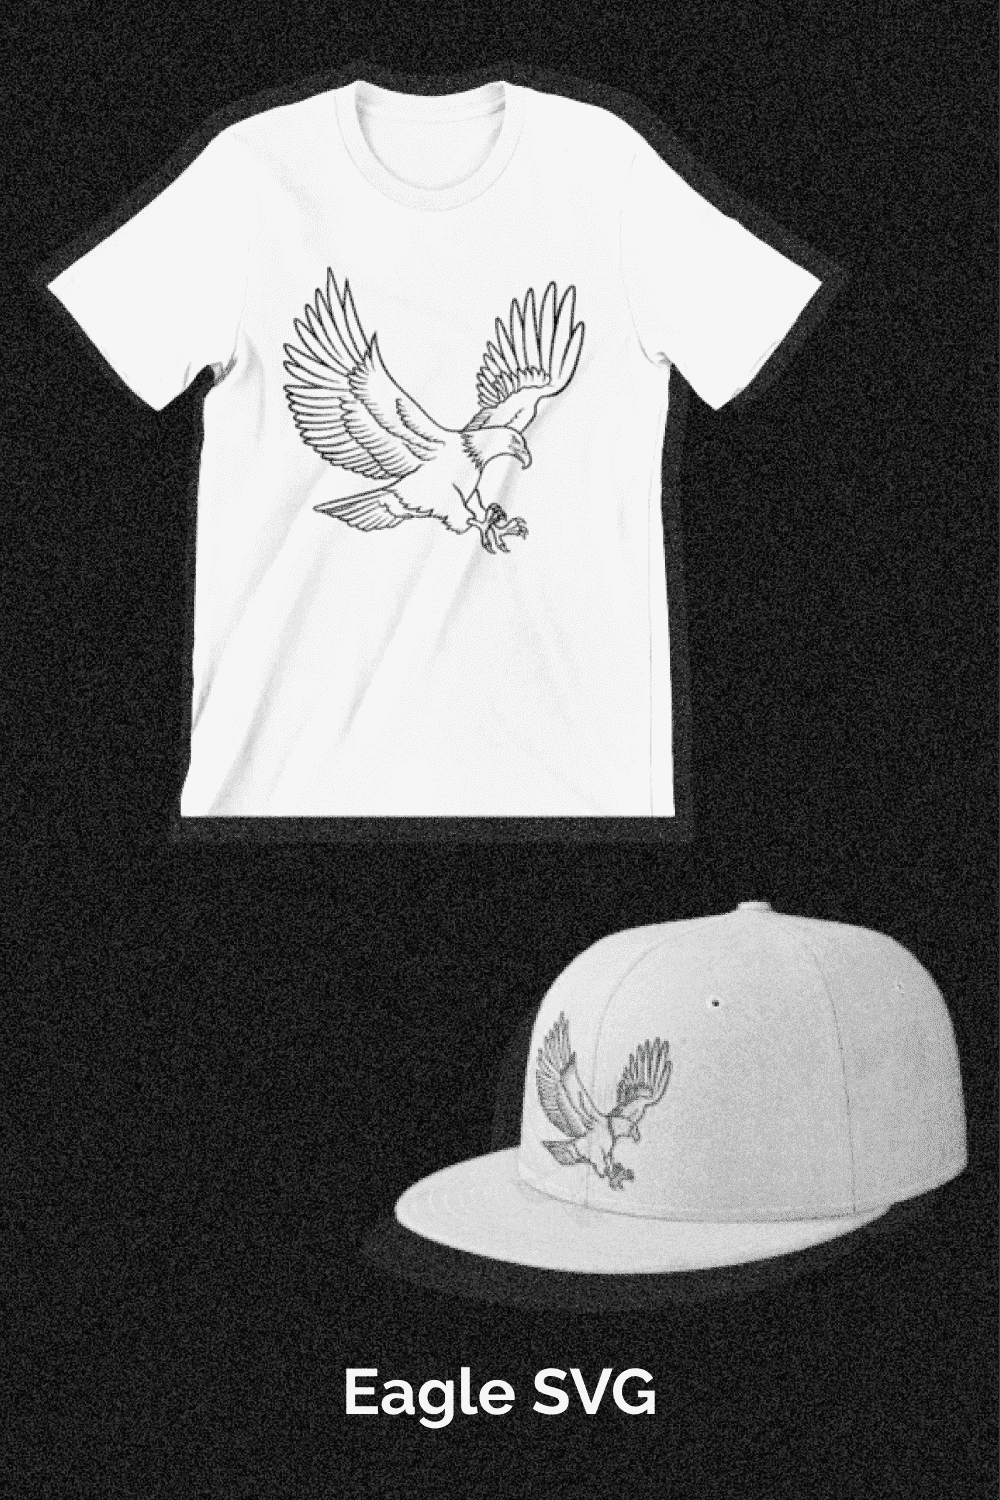 Eagle SVG - Eagle On The T-Shirt And Cap.